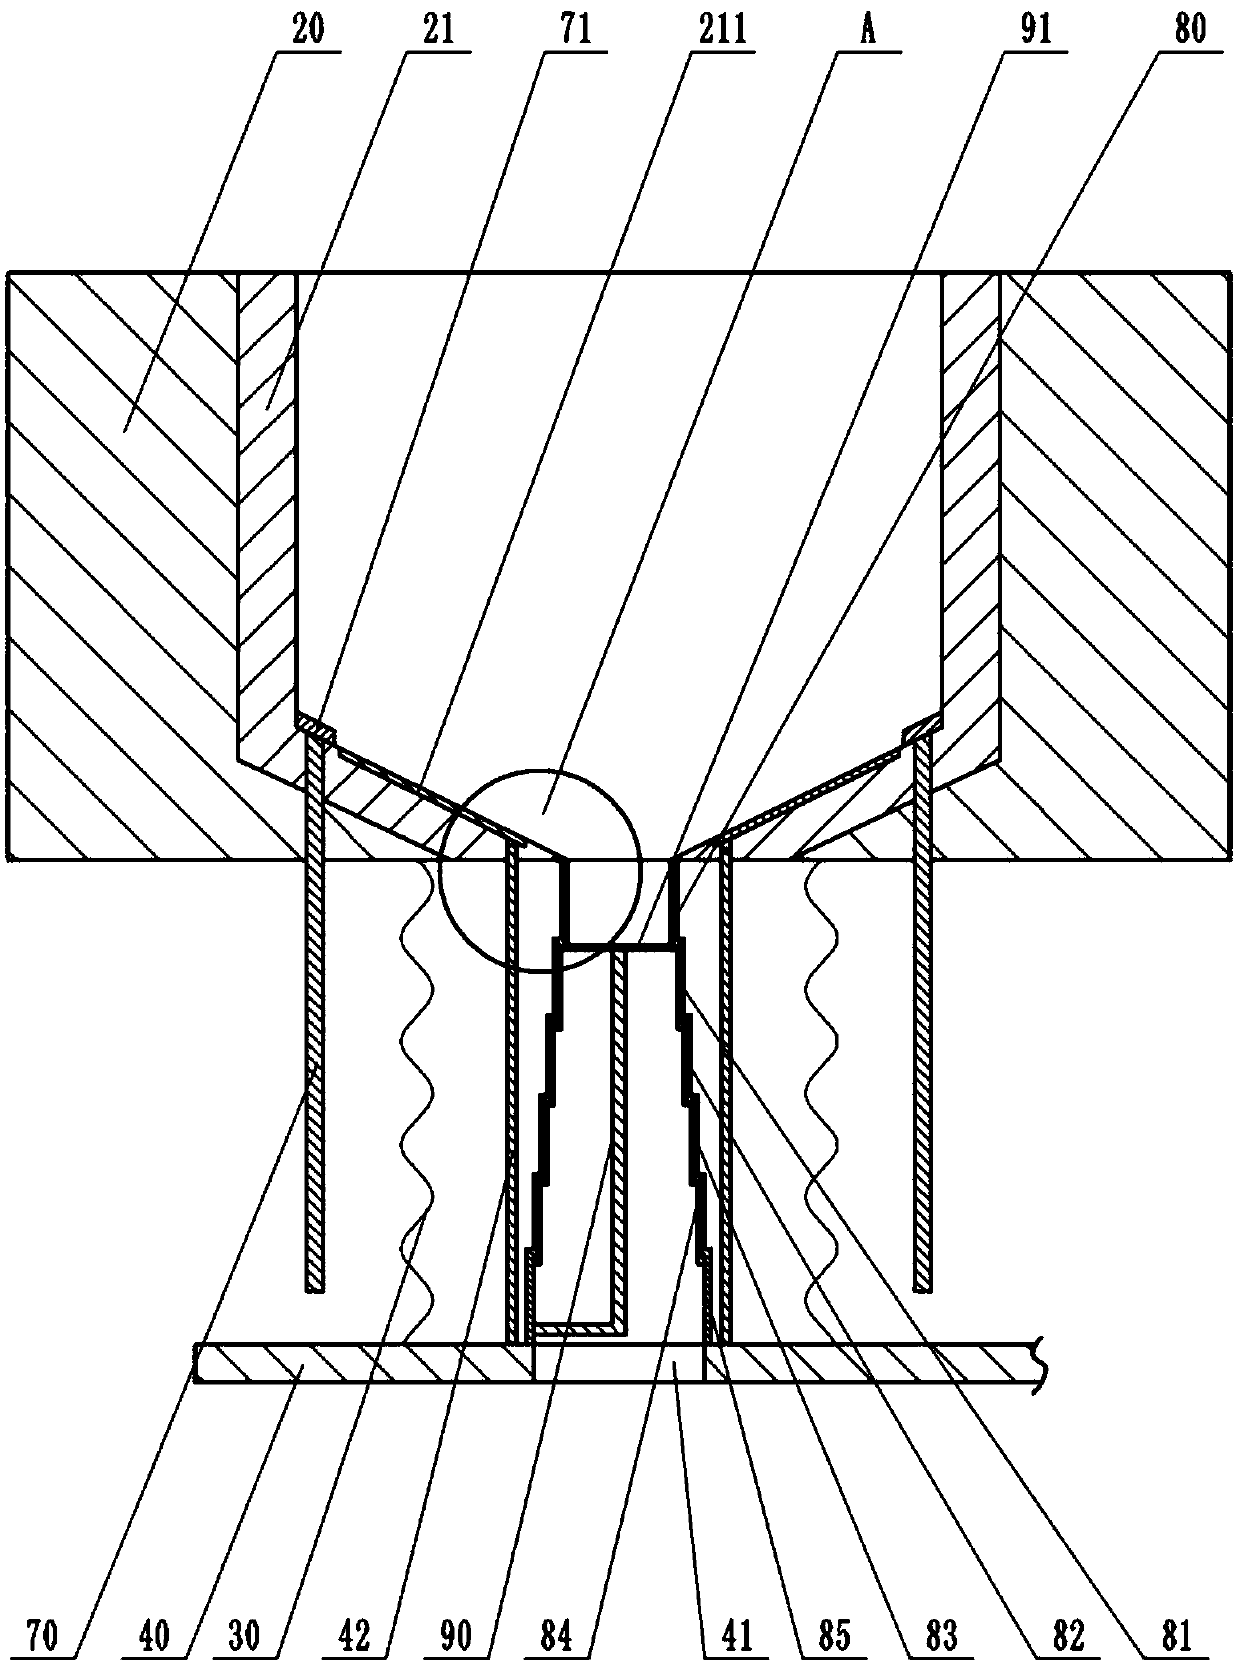 Slag discharge structure of secondary combustor